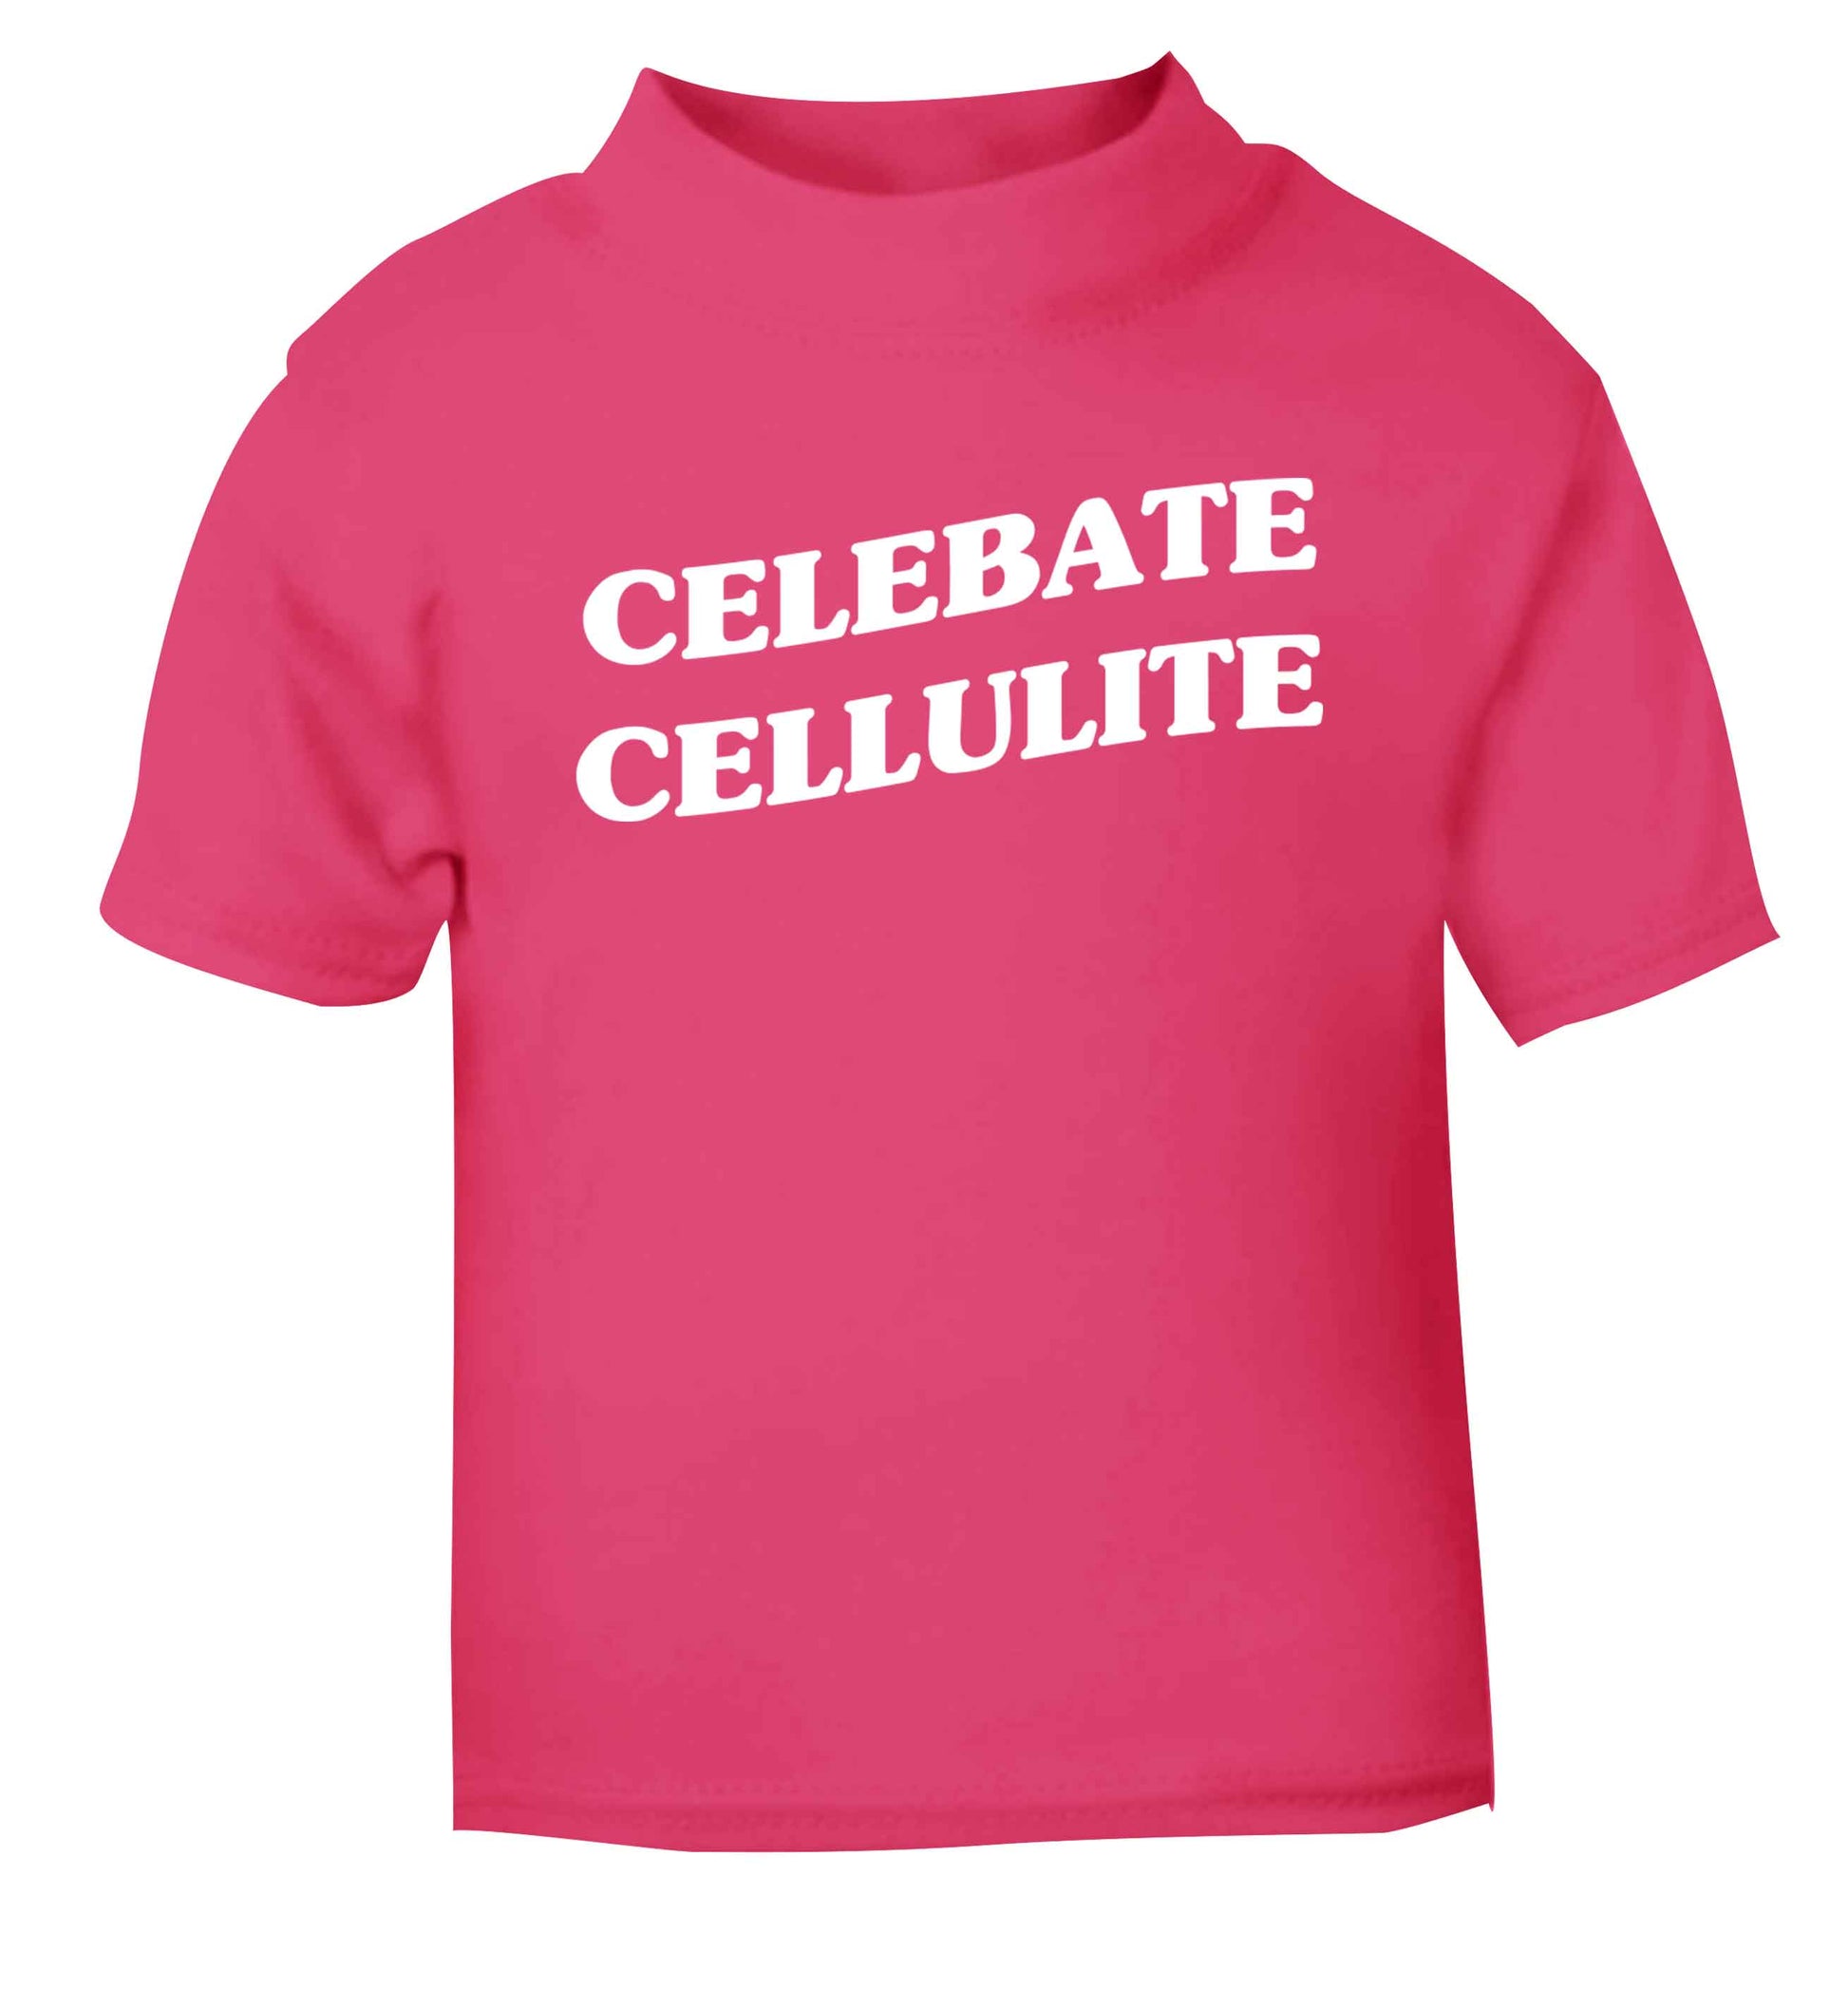 Celebrate cellulite pink baby toddler Tshirt 2 Years